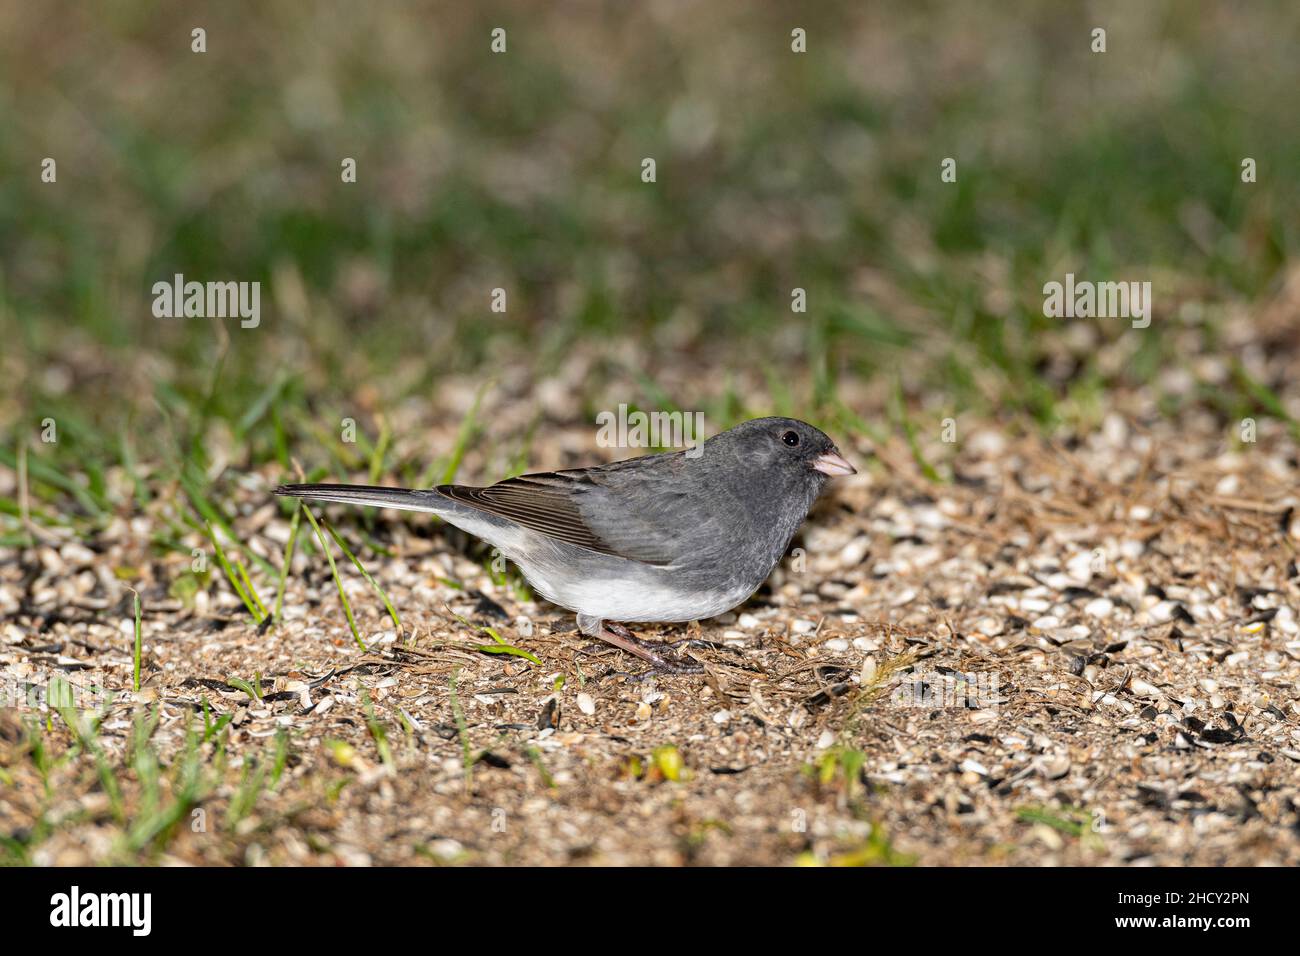 Junco foraging on ground. Stock Photo